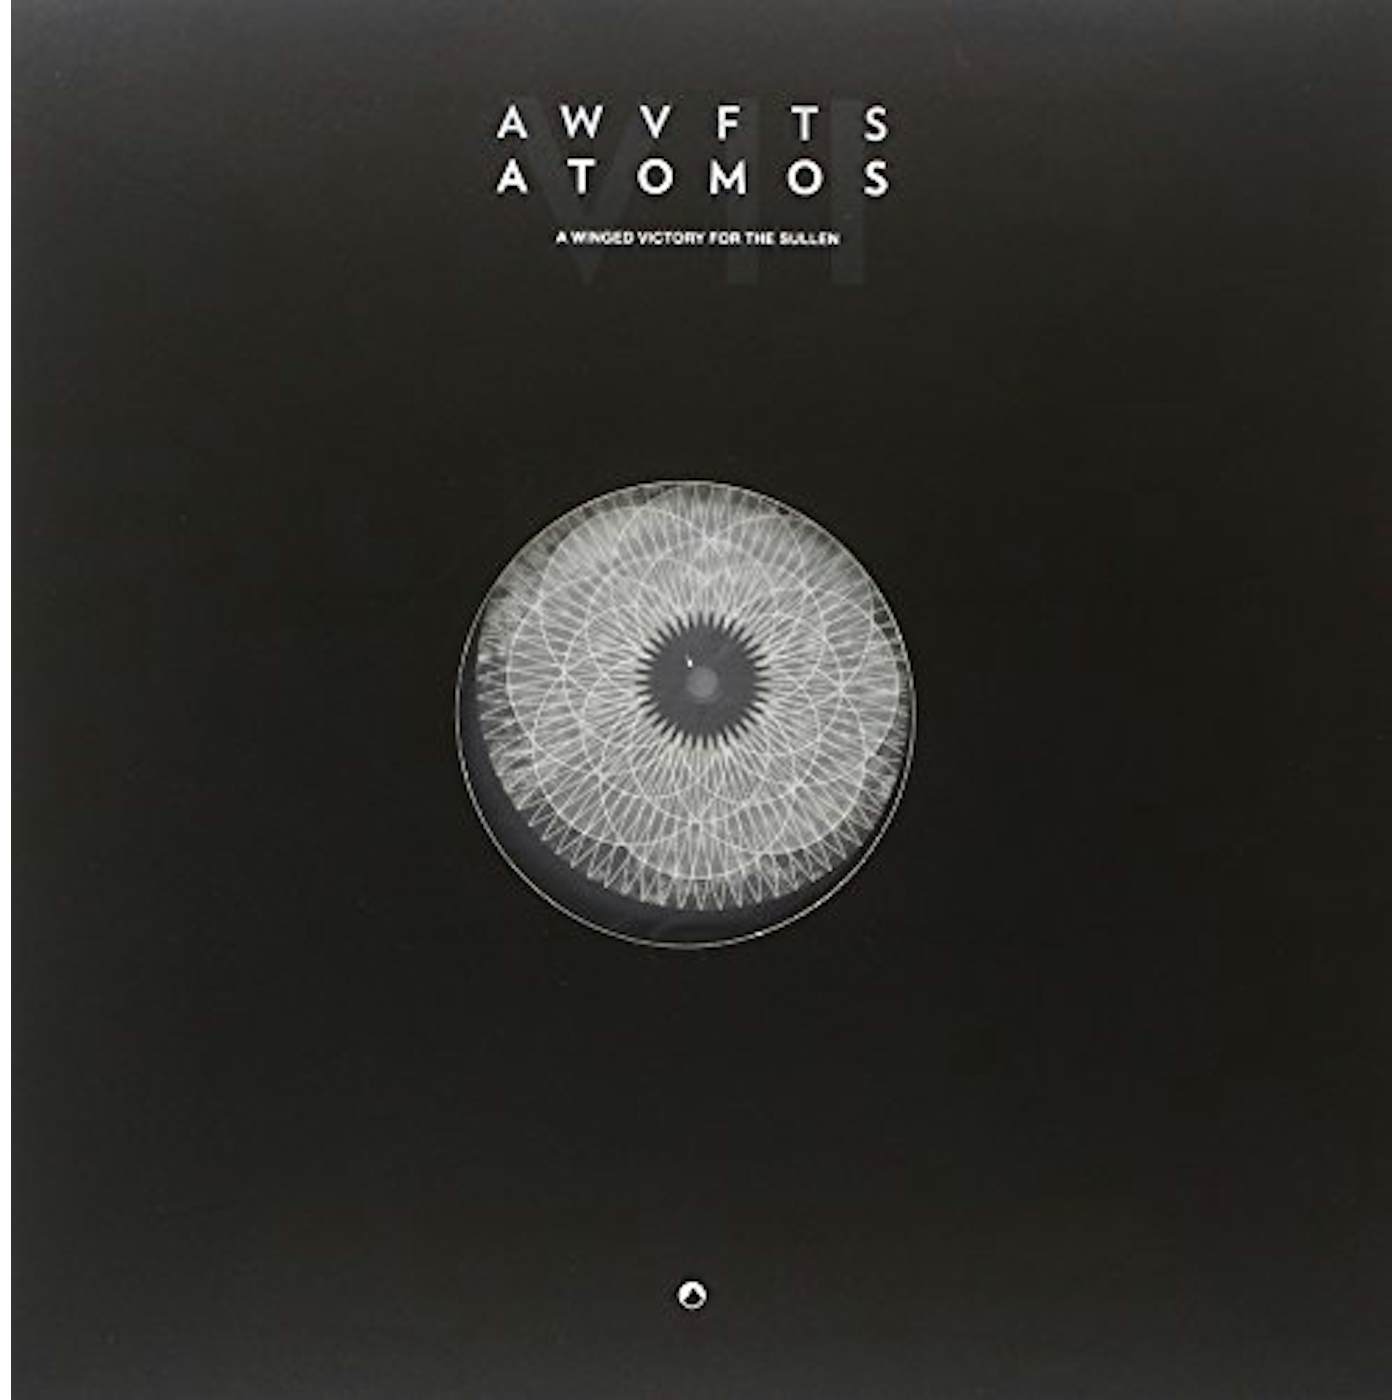 A Winged Victory for the Sullen Atomos VII Vinyl Record